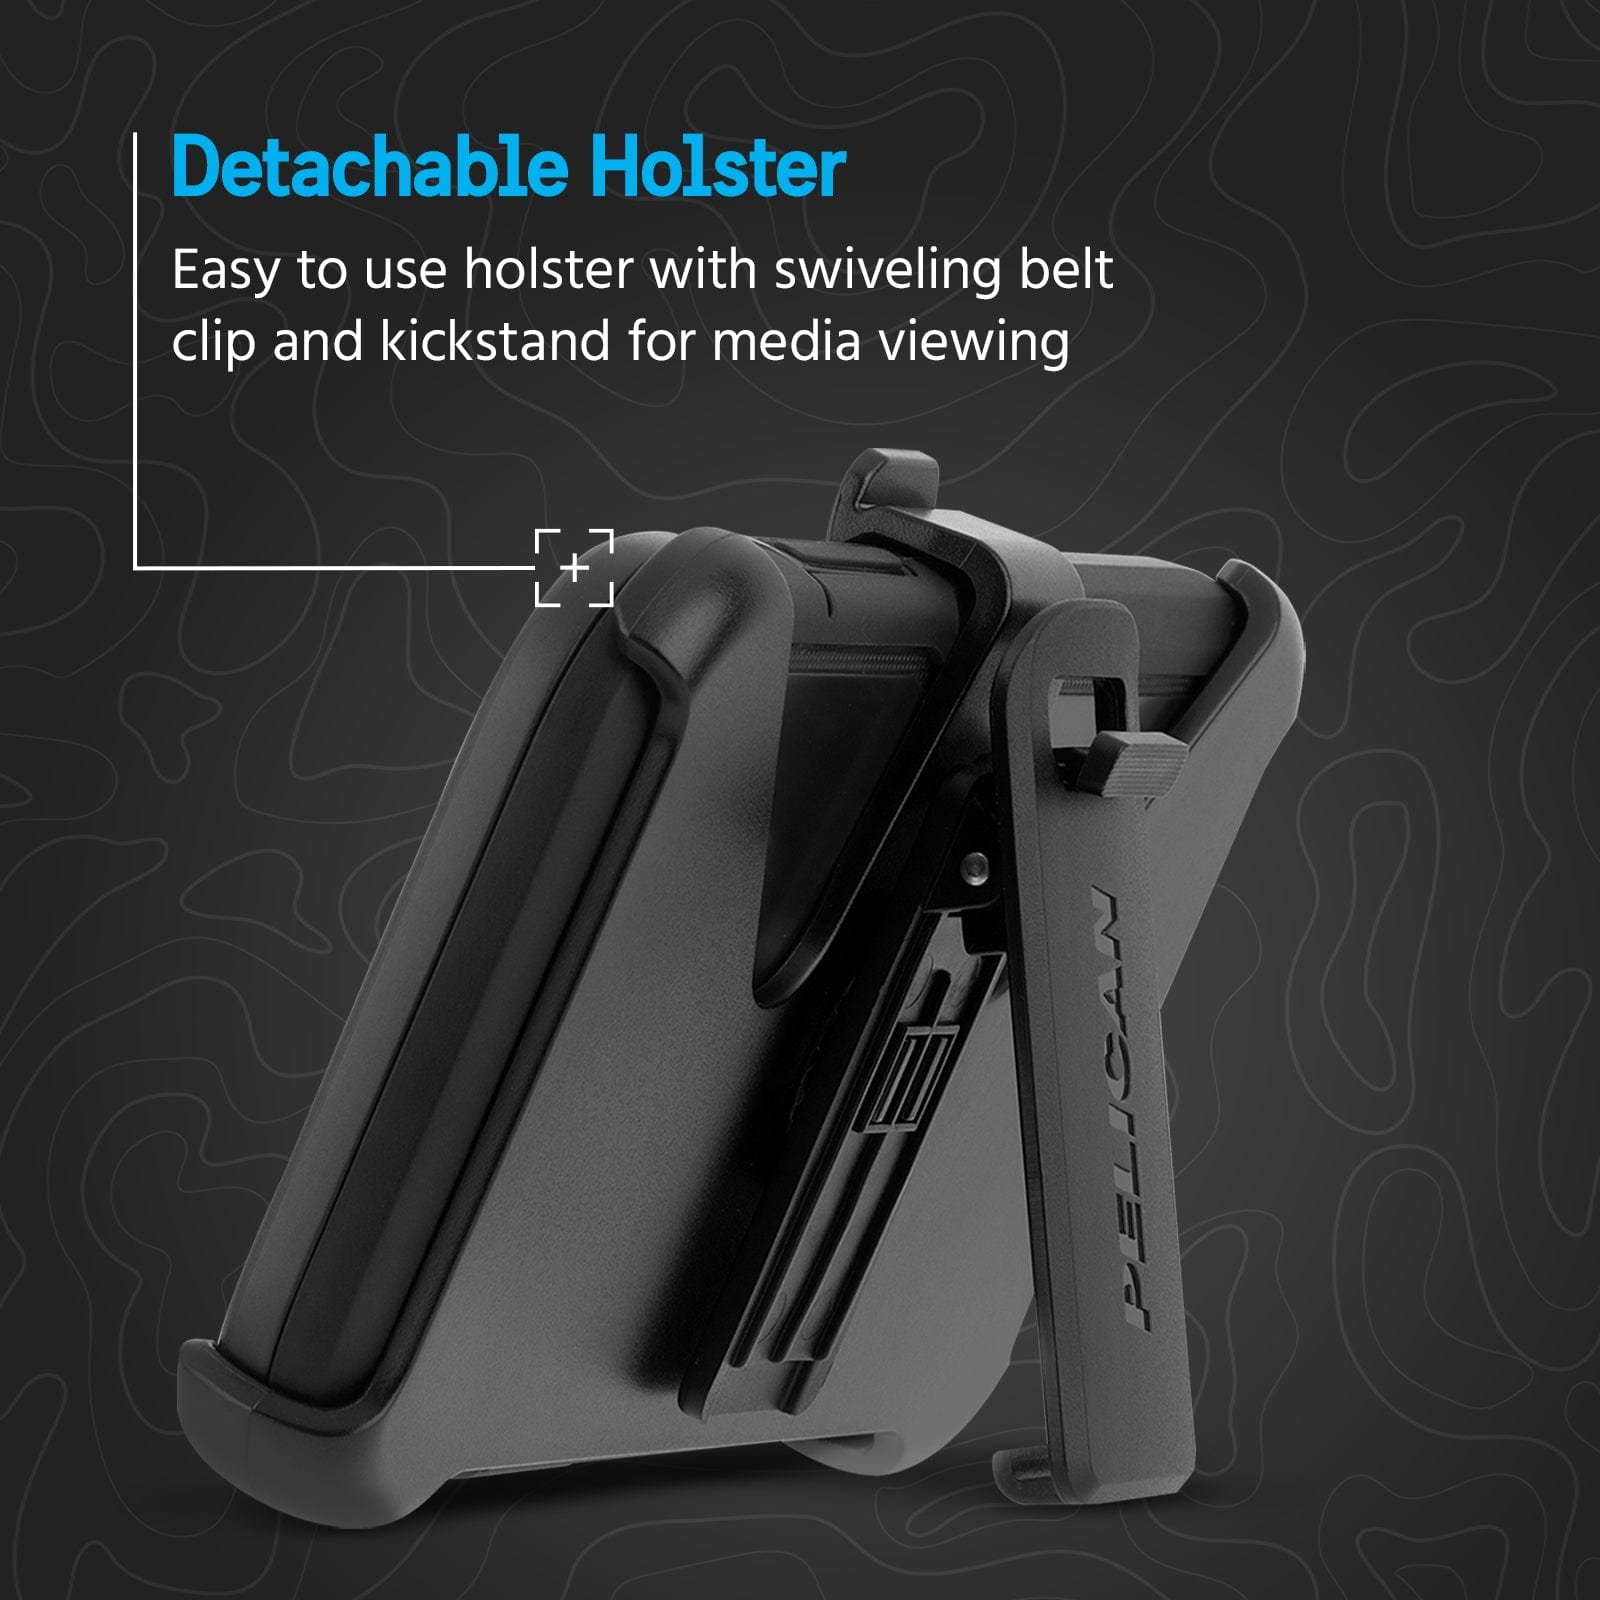 DETACHABLE HOLSTER. EASY TO USE HOLSTER WITH SWIVELING BELT CLIP AND KICKSTAND FOR MEDIA VIEWING. 